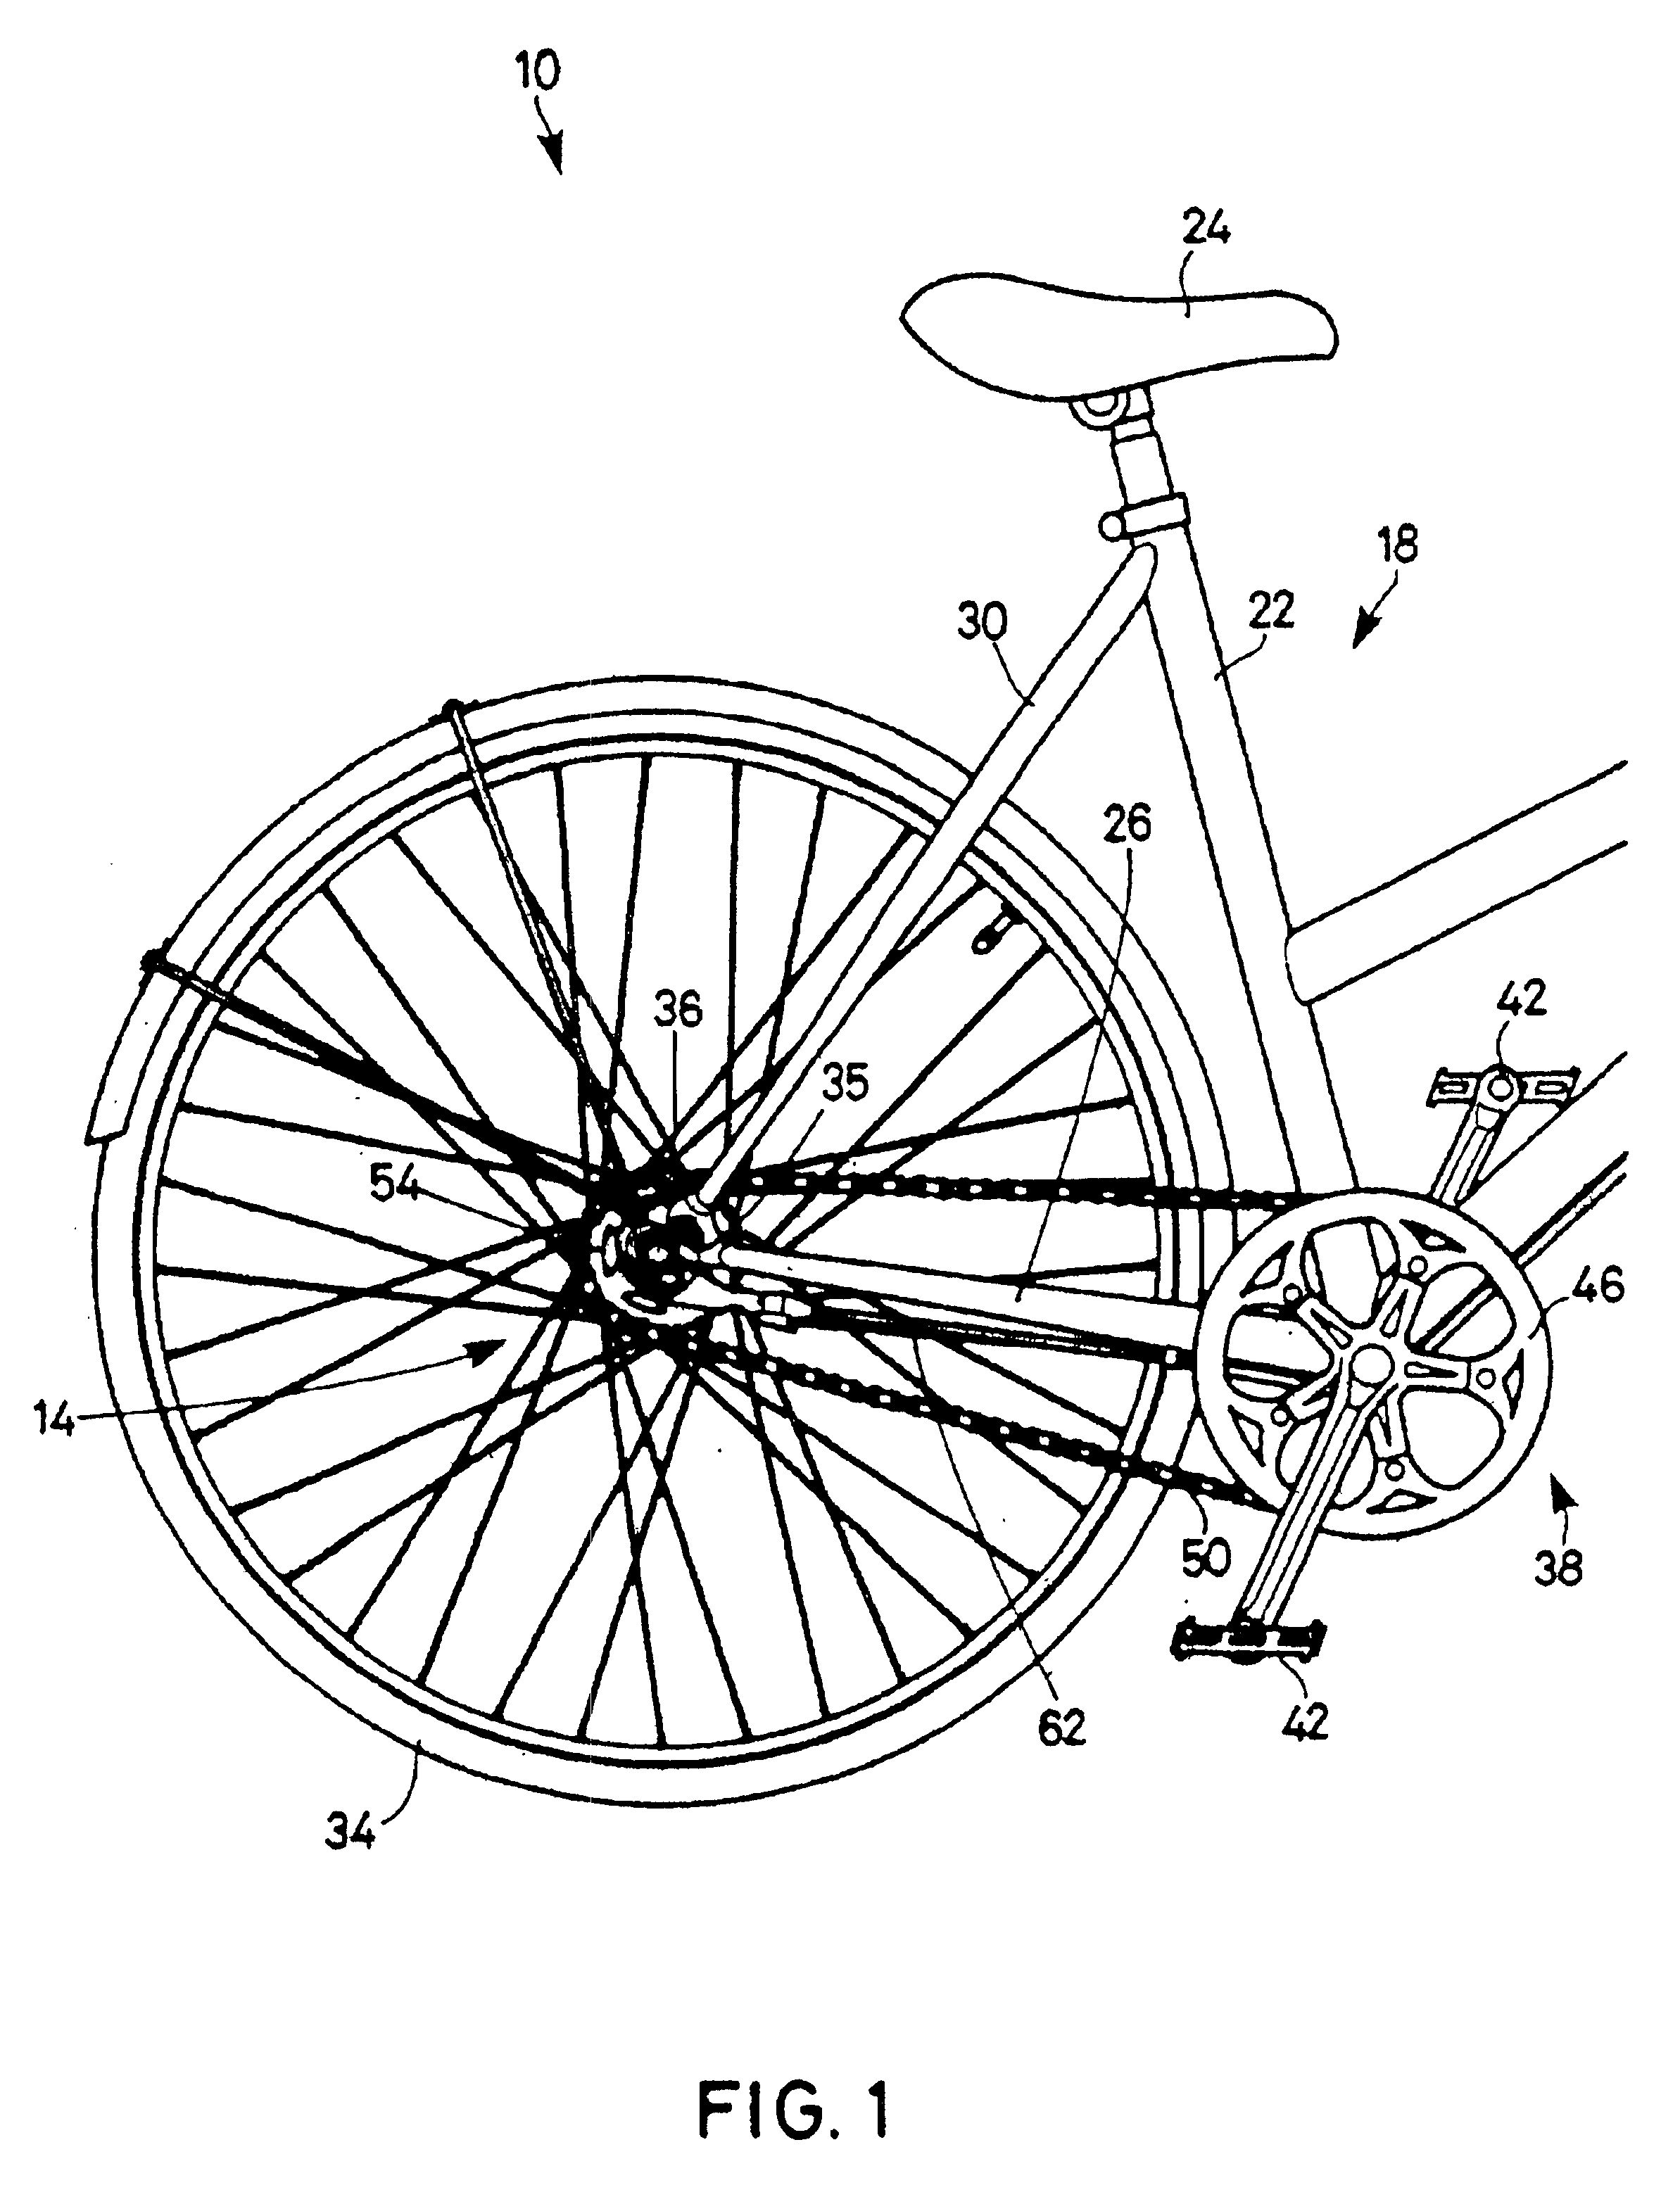 Multiple piece planet gear carrier for a bicycle hub transmission